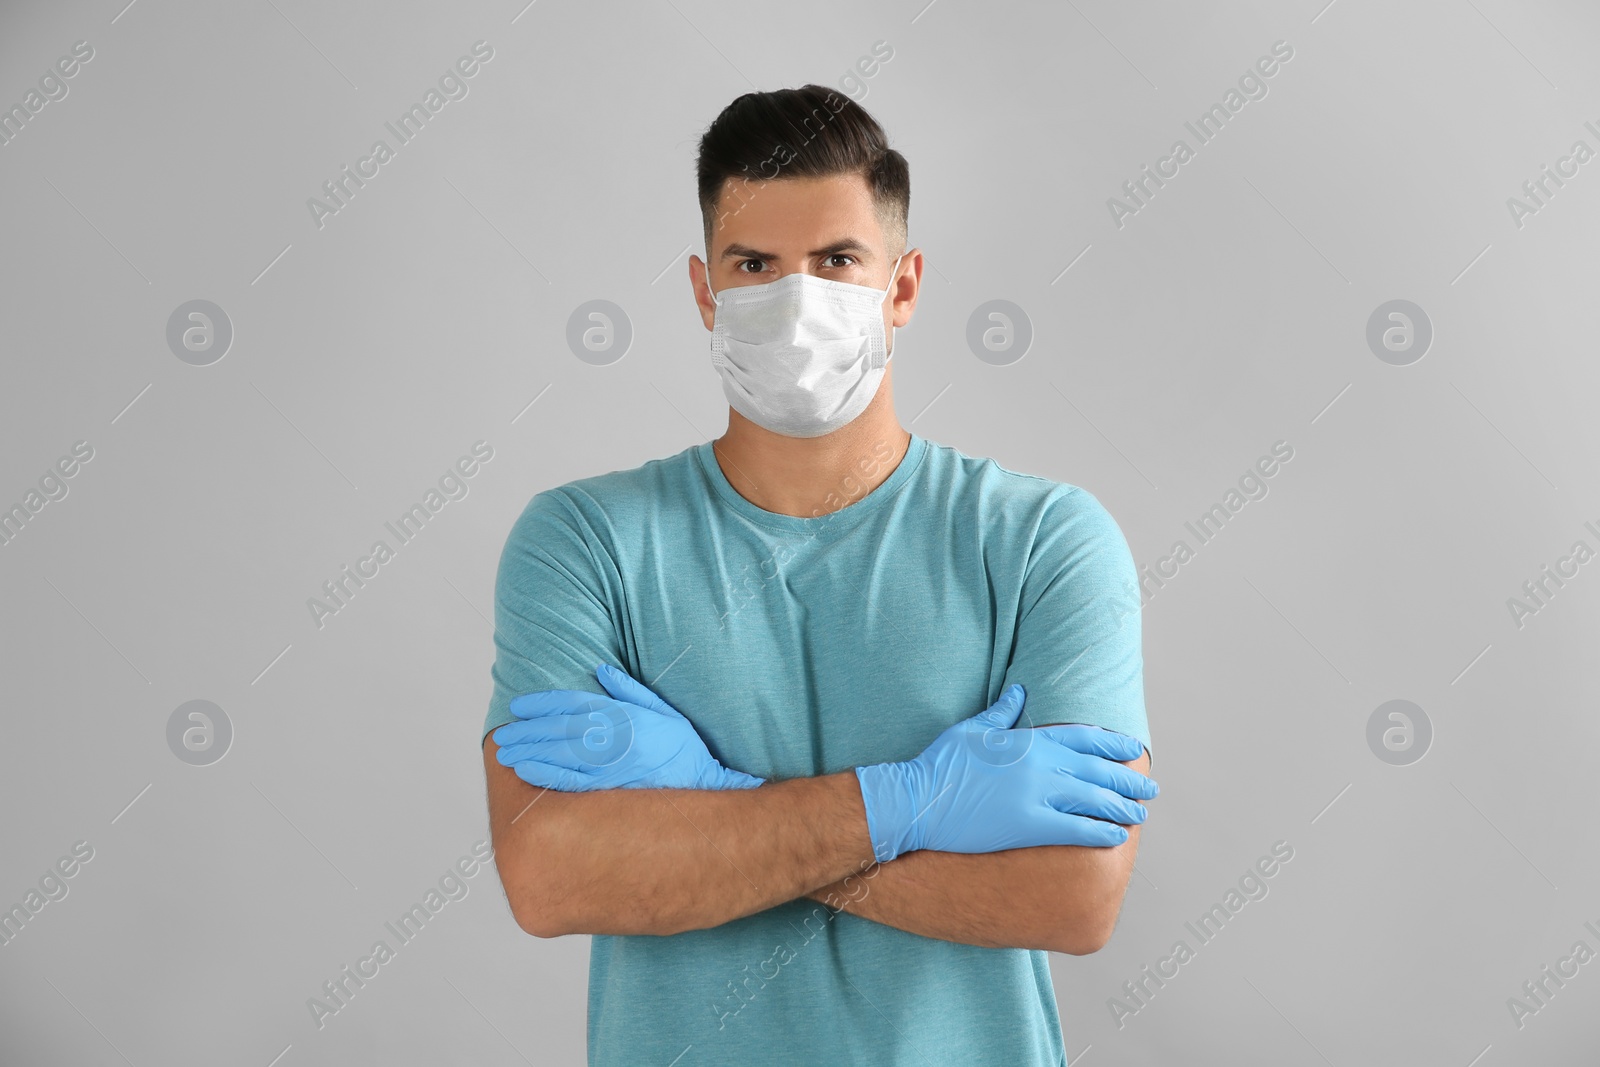 Photo of Man wearing protective face mask and medical gloves on grey background